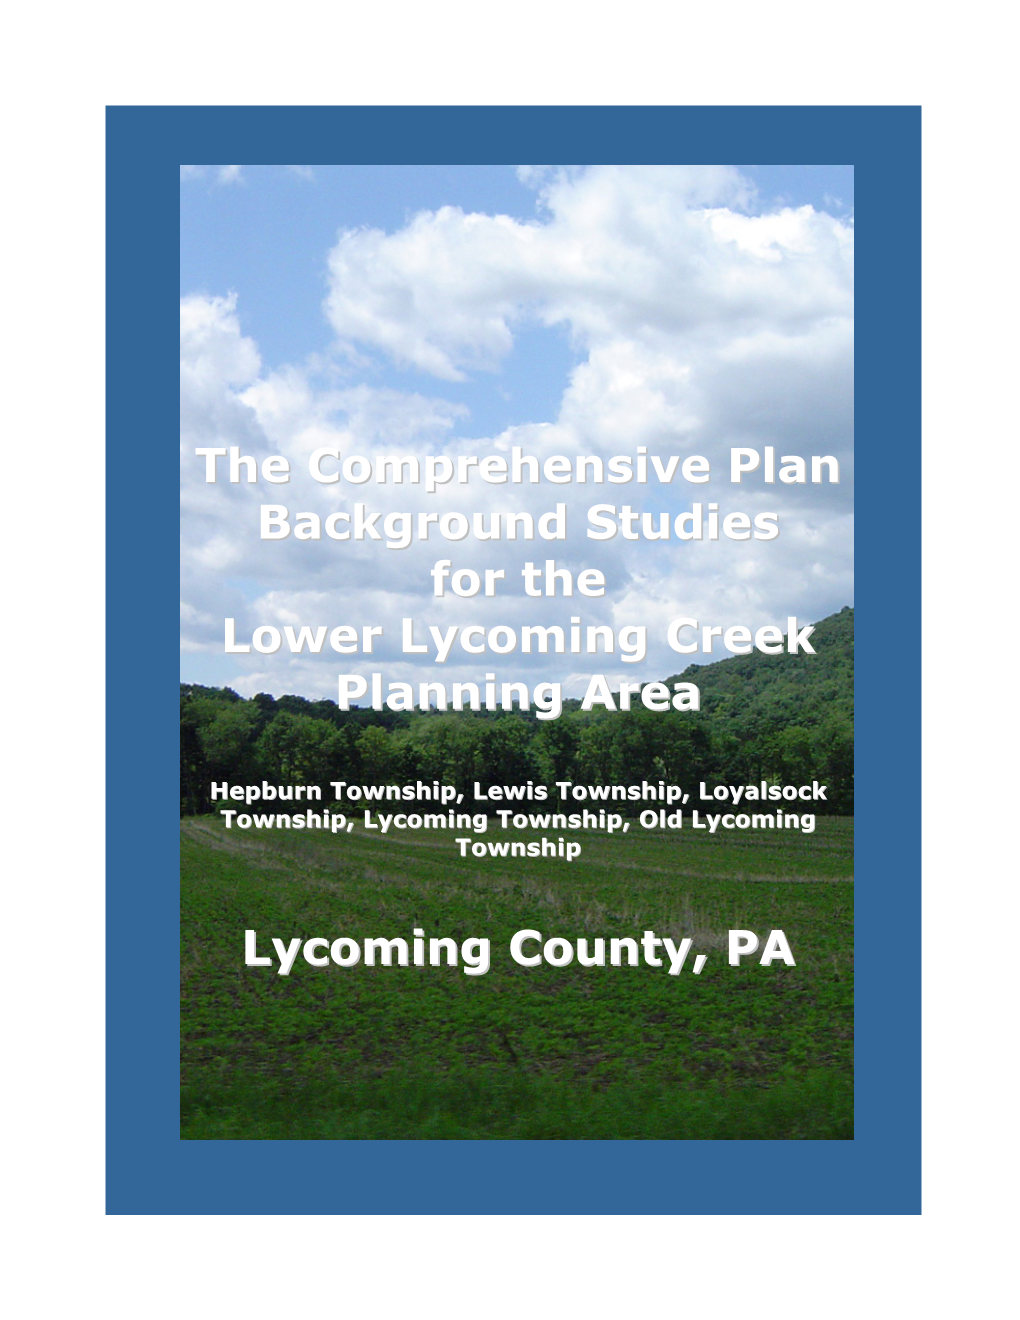 The Comprehensive Plan Background Studies for the Lower Lycoming